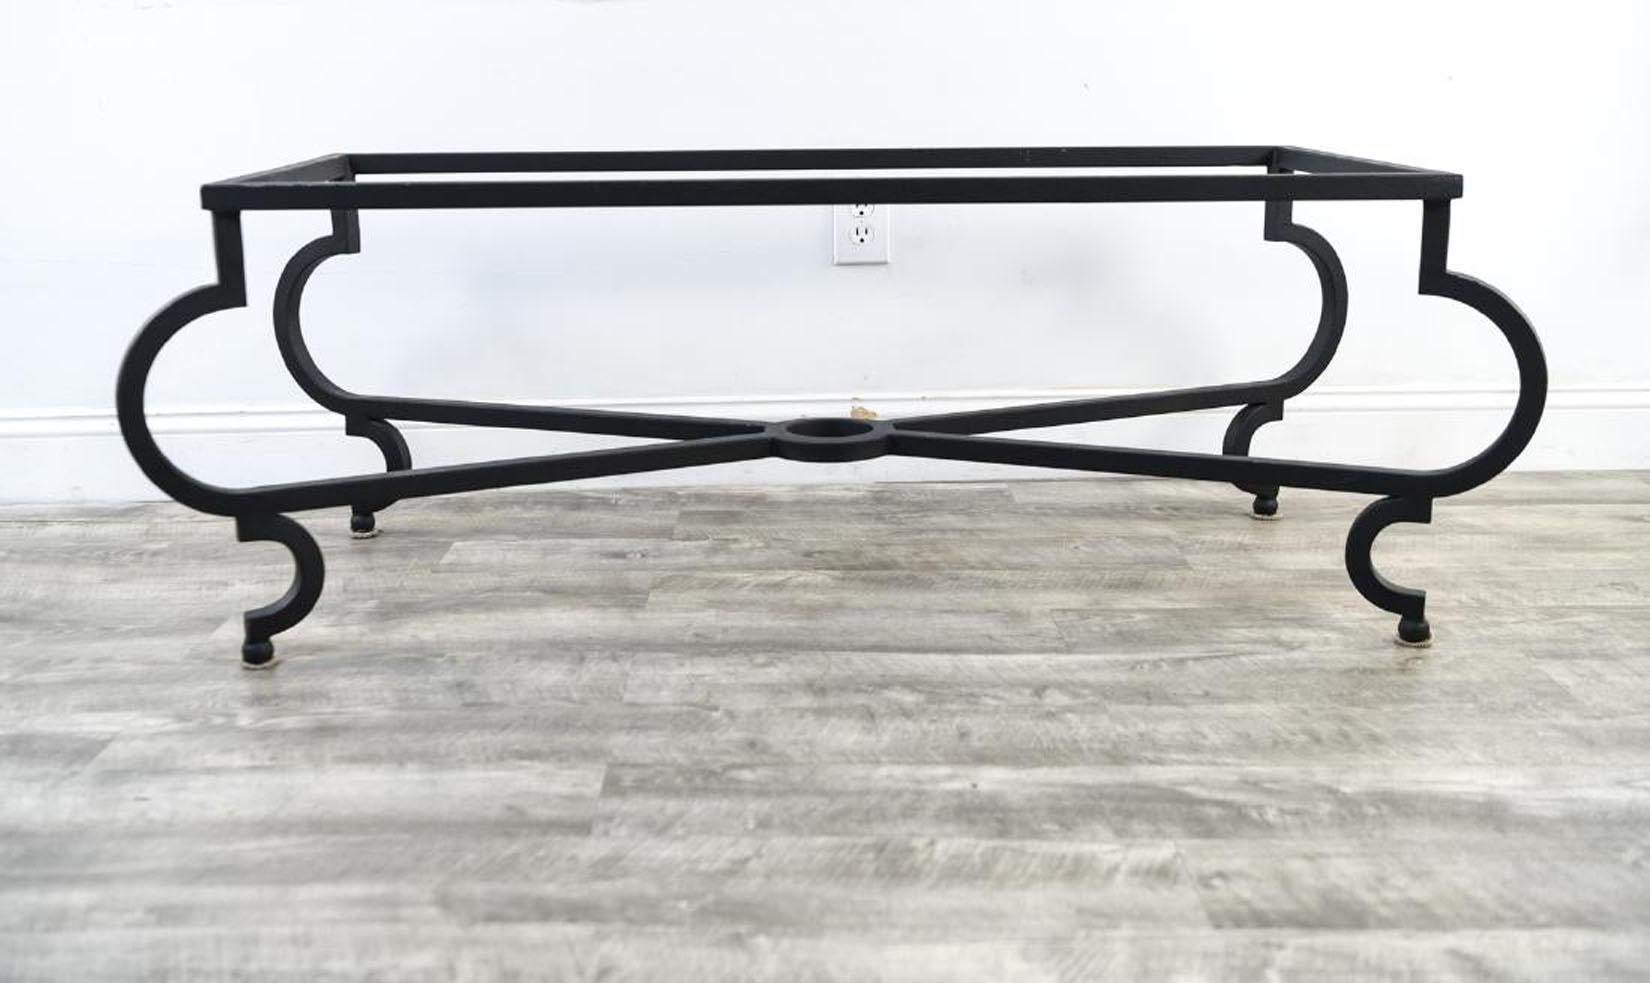 Black metal coffee table base, add your own stone, wood or glass top. Table legs with volute scrolled shape and cross stretcher connected by a circular ring. Elegant silhouette, this coffee table base will bring a stylish touch to any home,